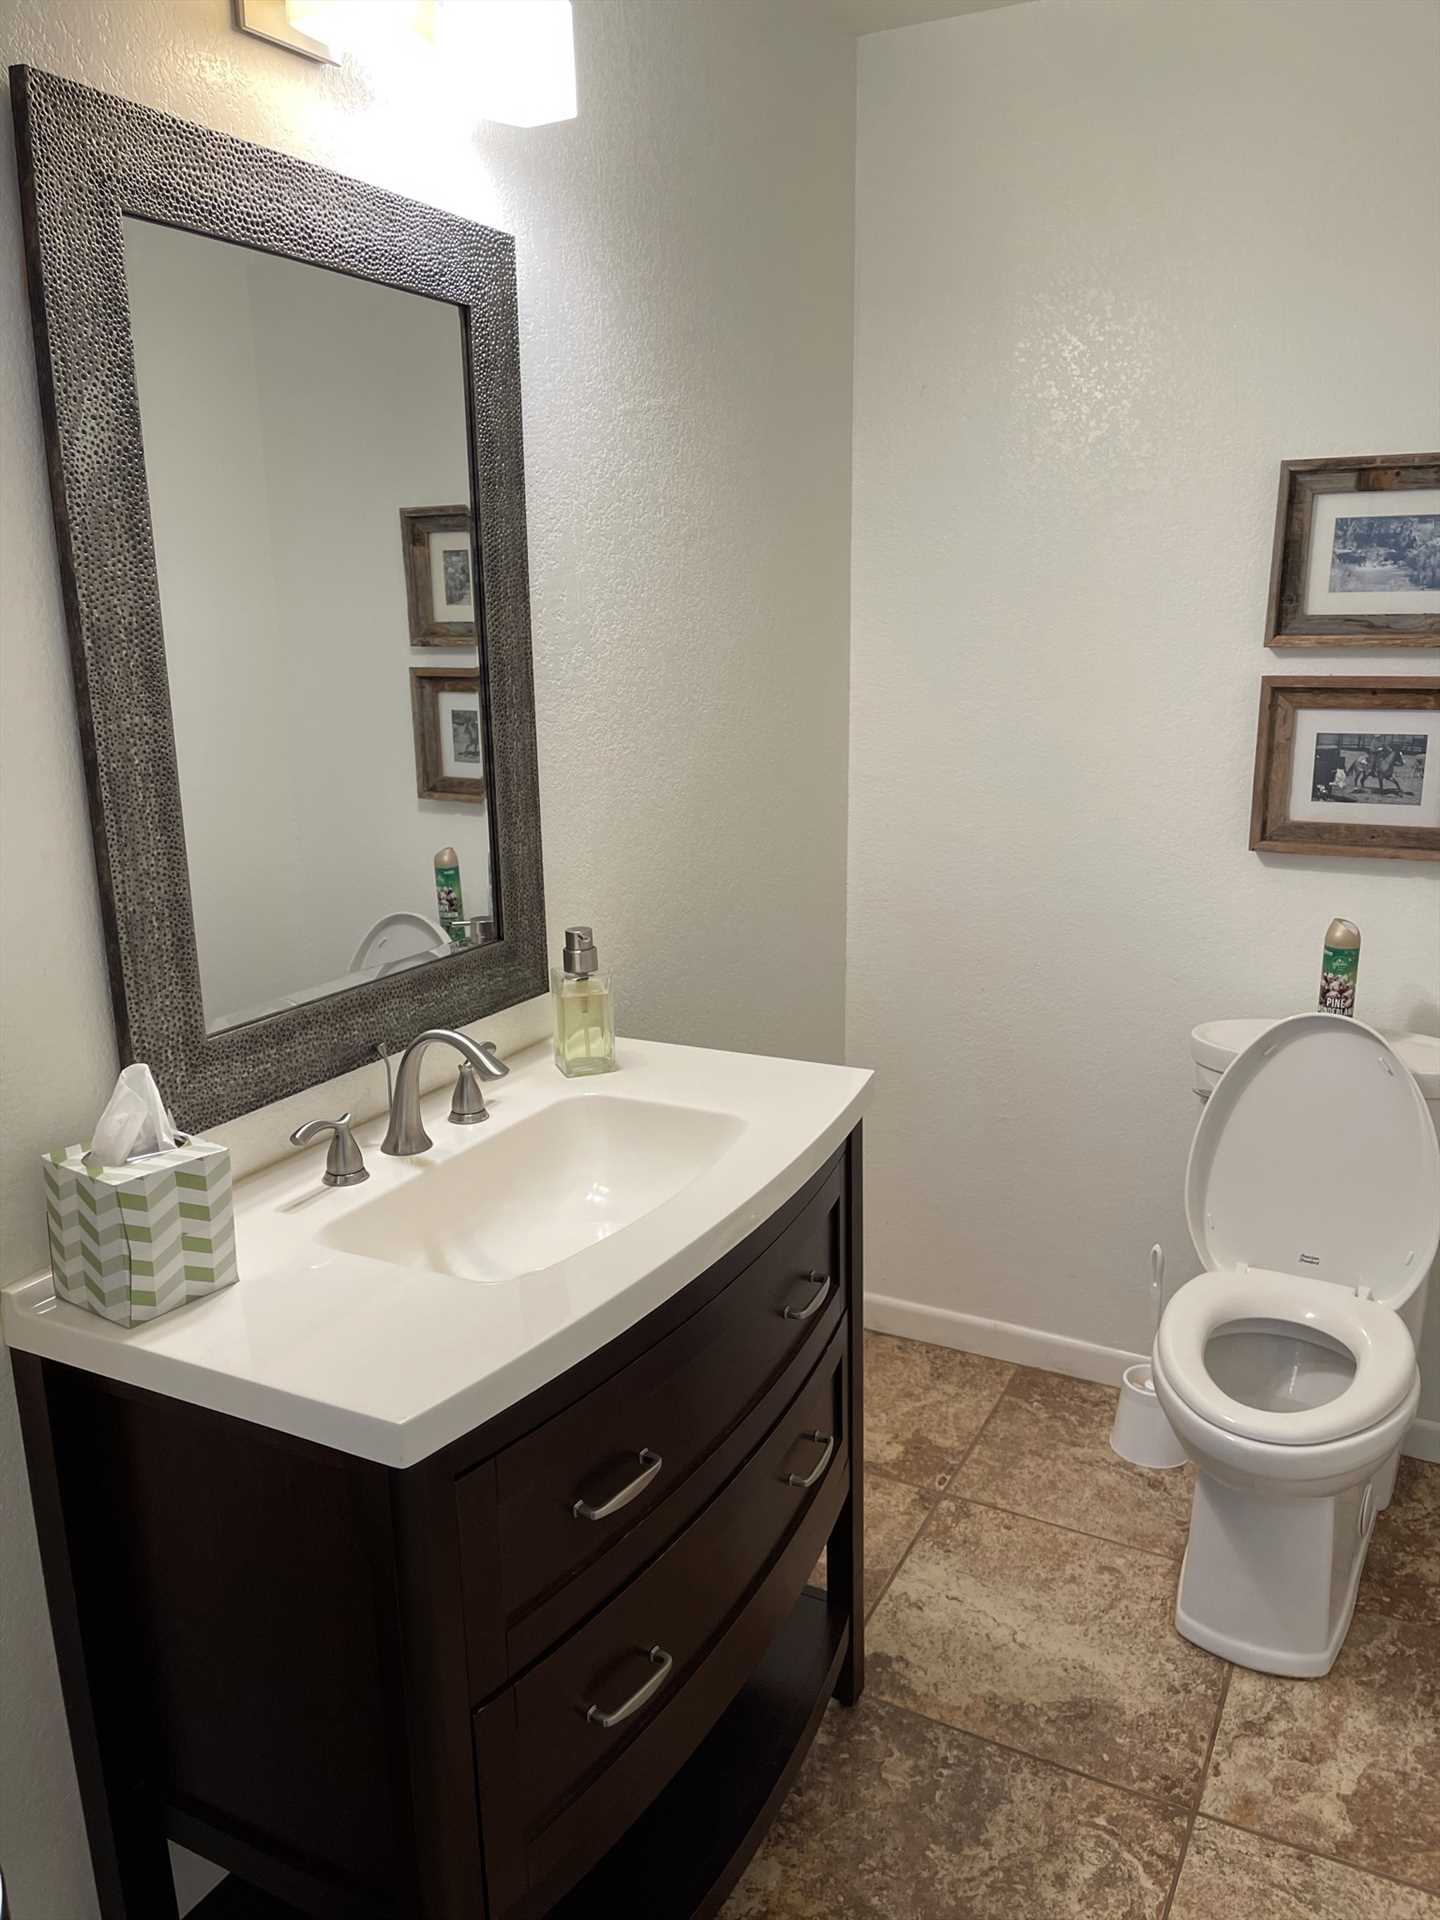                                                 The Lodge also includes an immaculately clean half-bath for the convenience of all West 1077 Guest Ranch visitors.